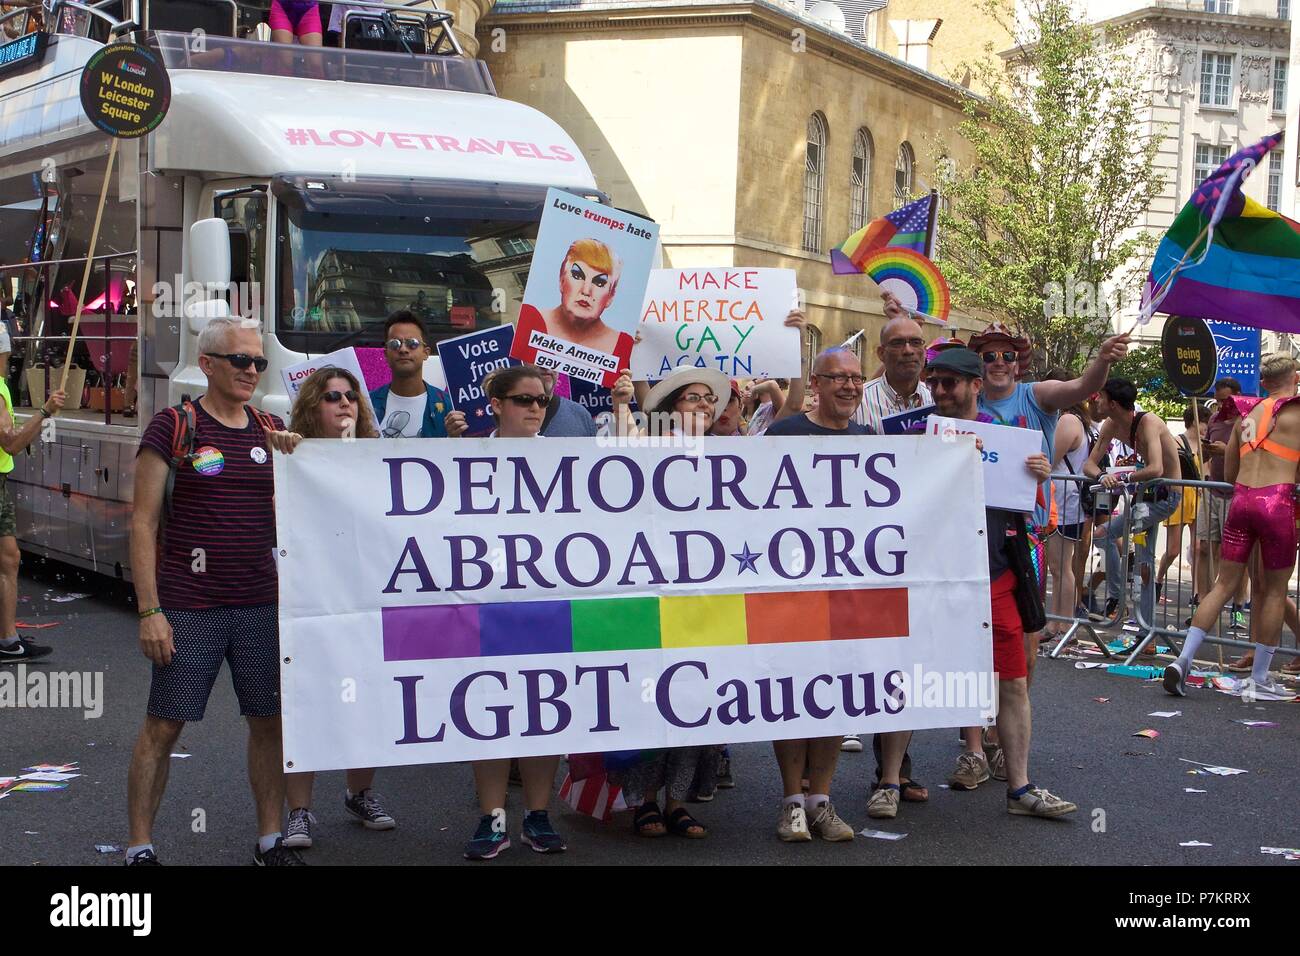 London, UK. 7th July 2018. Pride celebrations in London Democrats Abroad Org LGBT Caucus at the Pride in London 2018 Parade in London with signs such as 'Make America Gay Again' and 'Love trumps hate'. They are joined by more than 1 million attending the march today to celebrate LGBT+ Credit: Dimple Patel/Alamy Live News Stock Photo